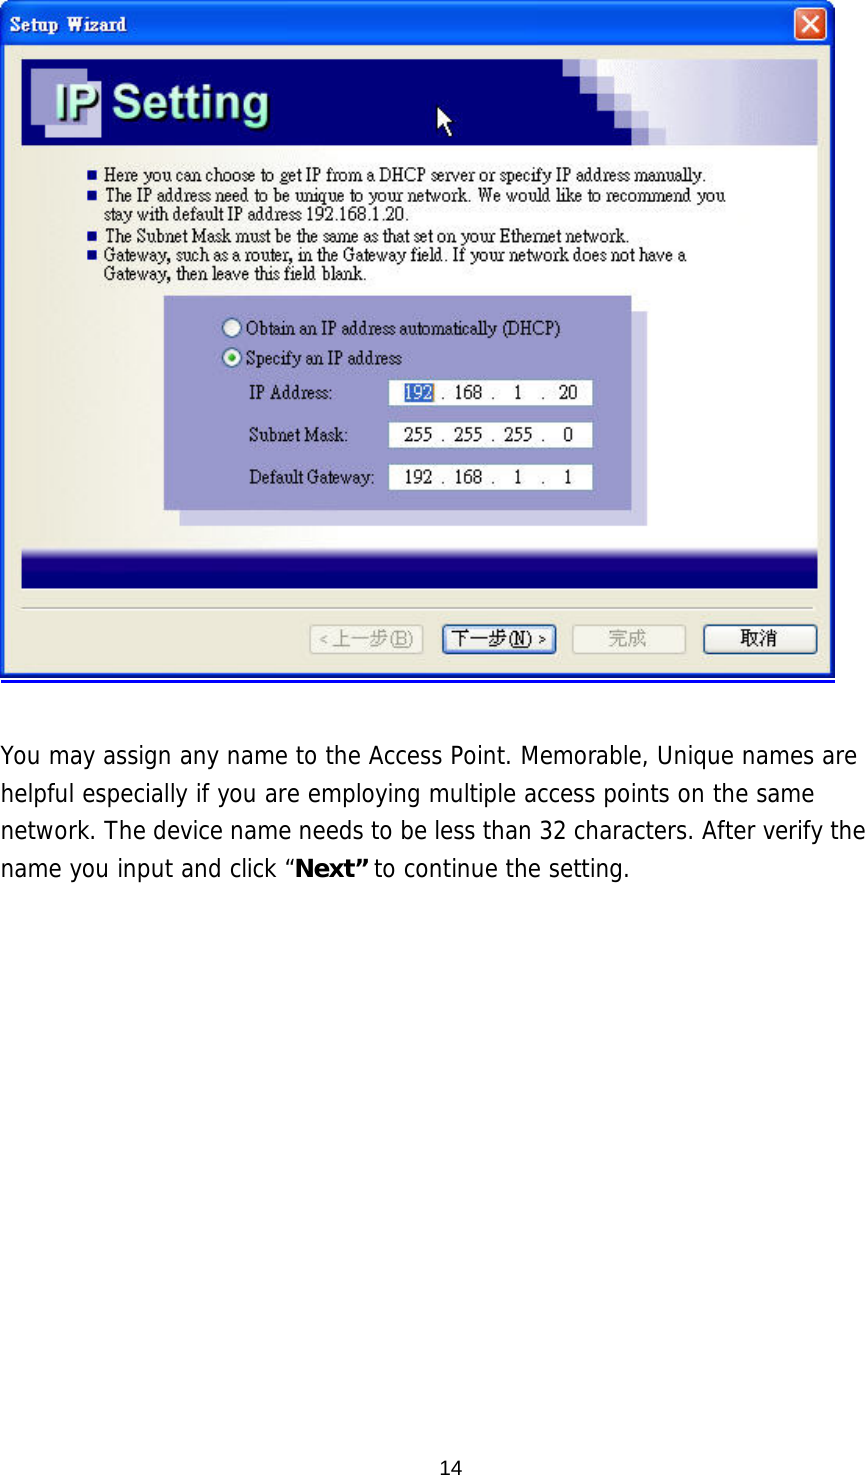   You may assign any name to the Access Point. Memorable, Unique names are helpful especially if you are employing multiple access points on the same network. The device name needs to be less than 32 characters. After verify the name you input and click “Next” to continue the setting.   14